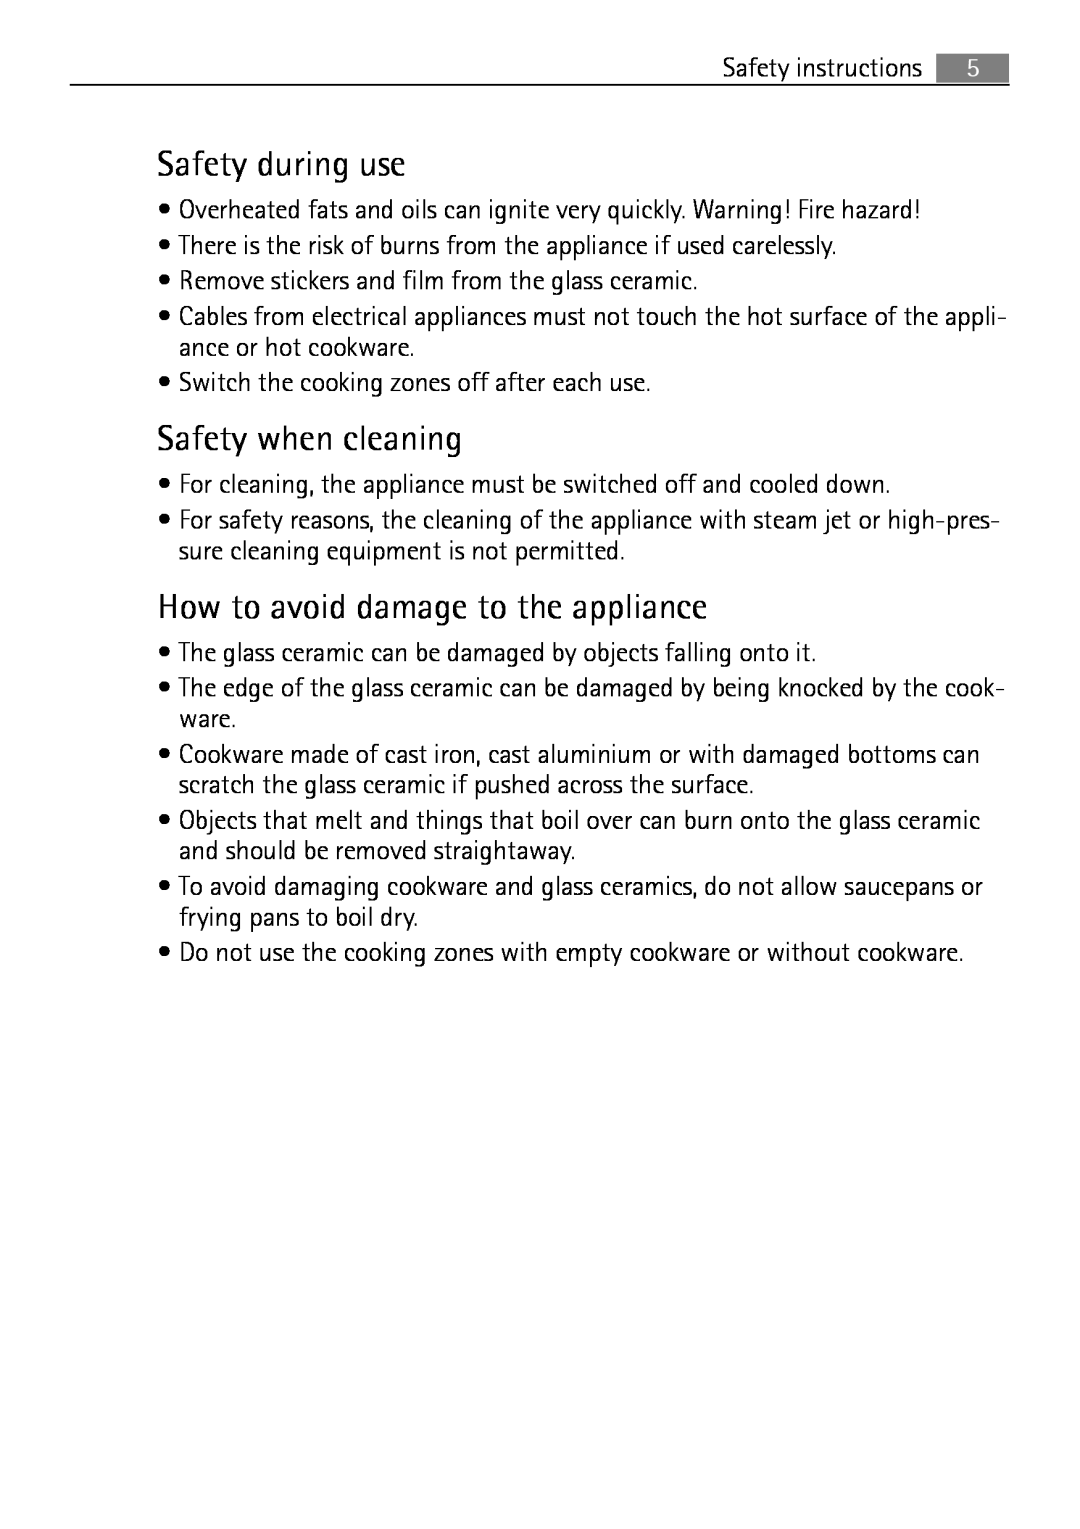 Electrolux 66331KF-N user manual Safety during use, Safety when cleaning, How to avoid damage to the appliance 